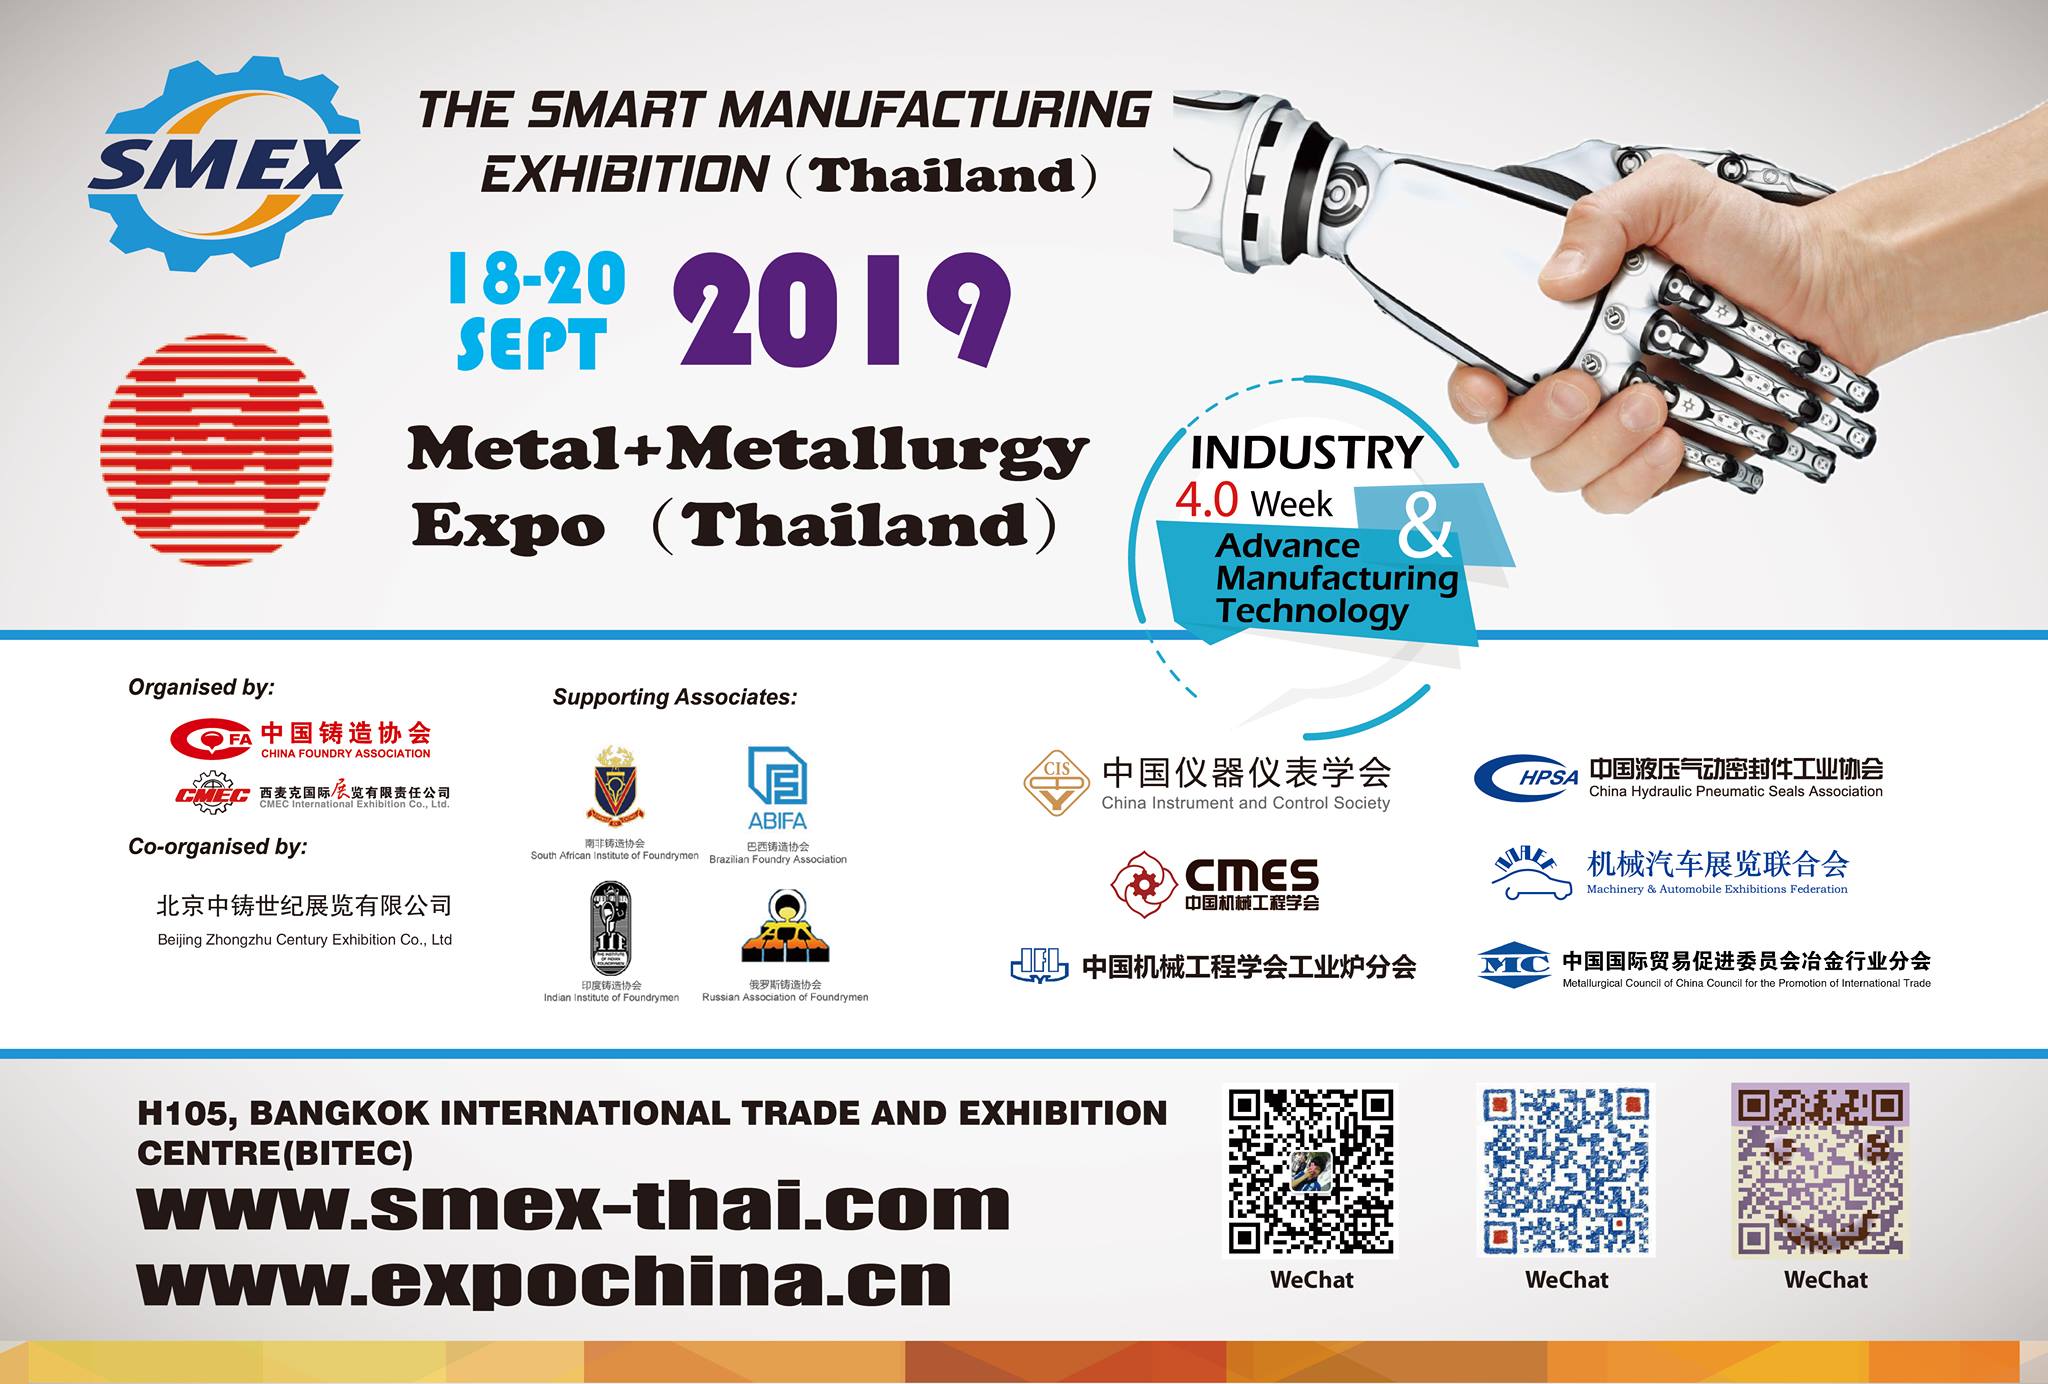 The Smart Manufacturing Exhibition 2019